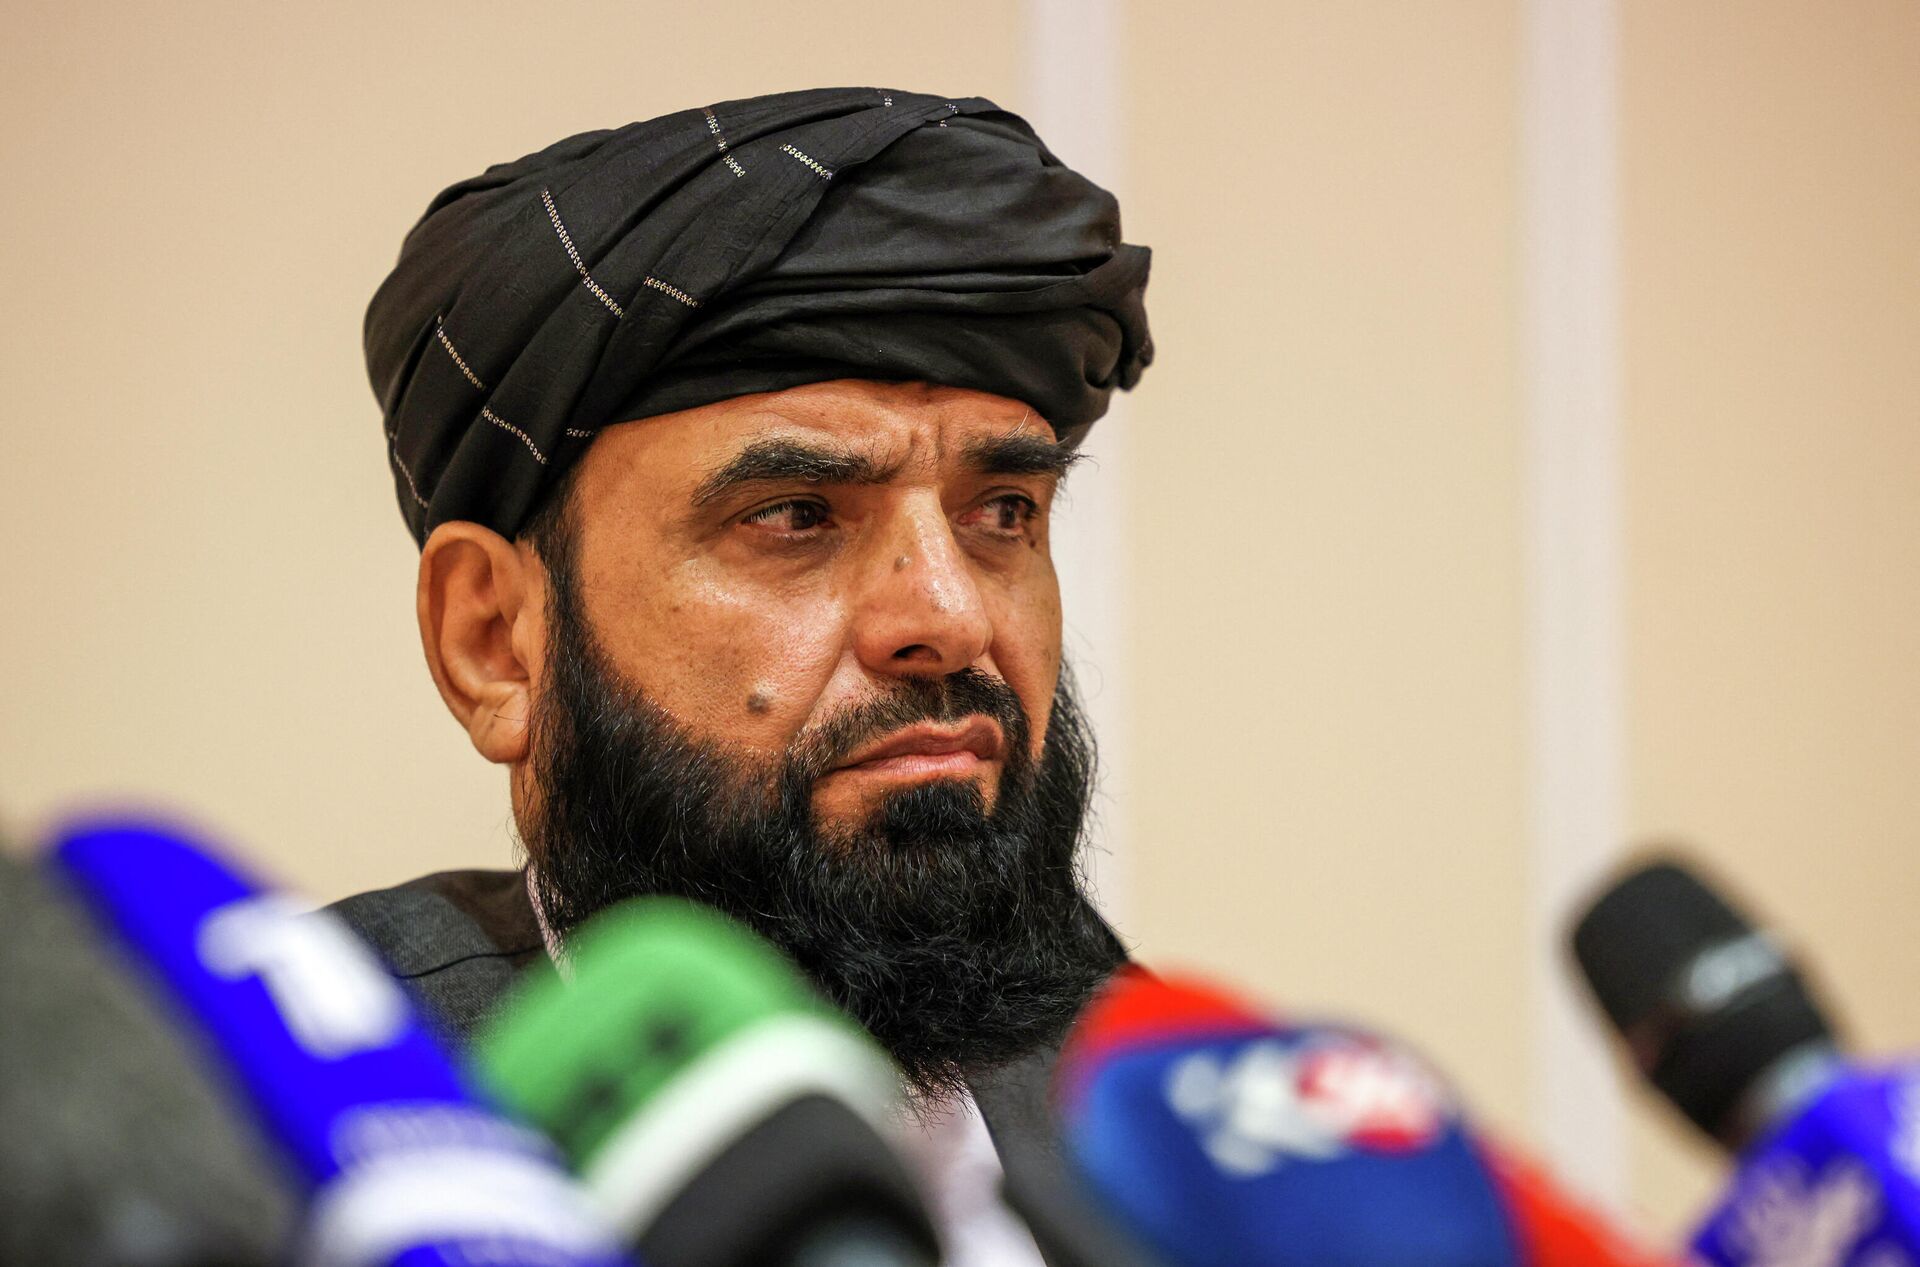 Taliban negotiator Suhail Shaheen attends a press conference in Moscow on July 9, 2021 - Sputnik International, 1920, 23.12.2021